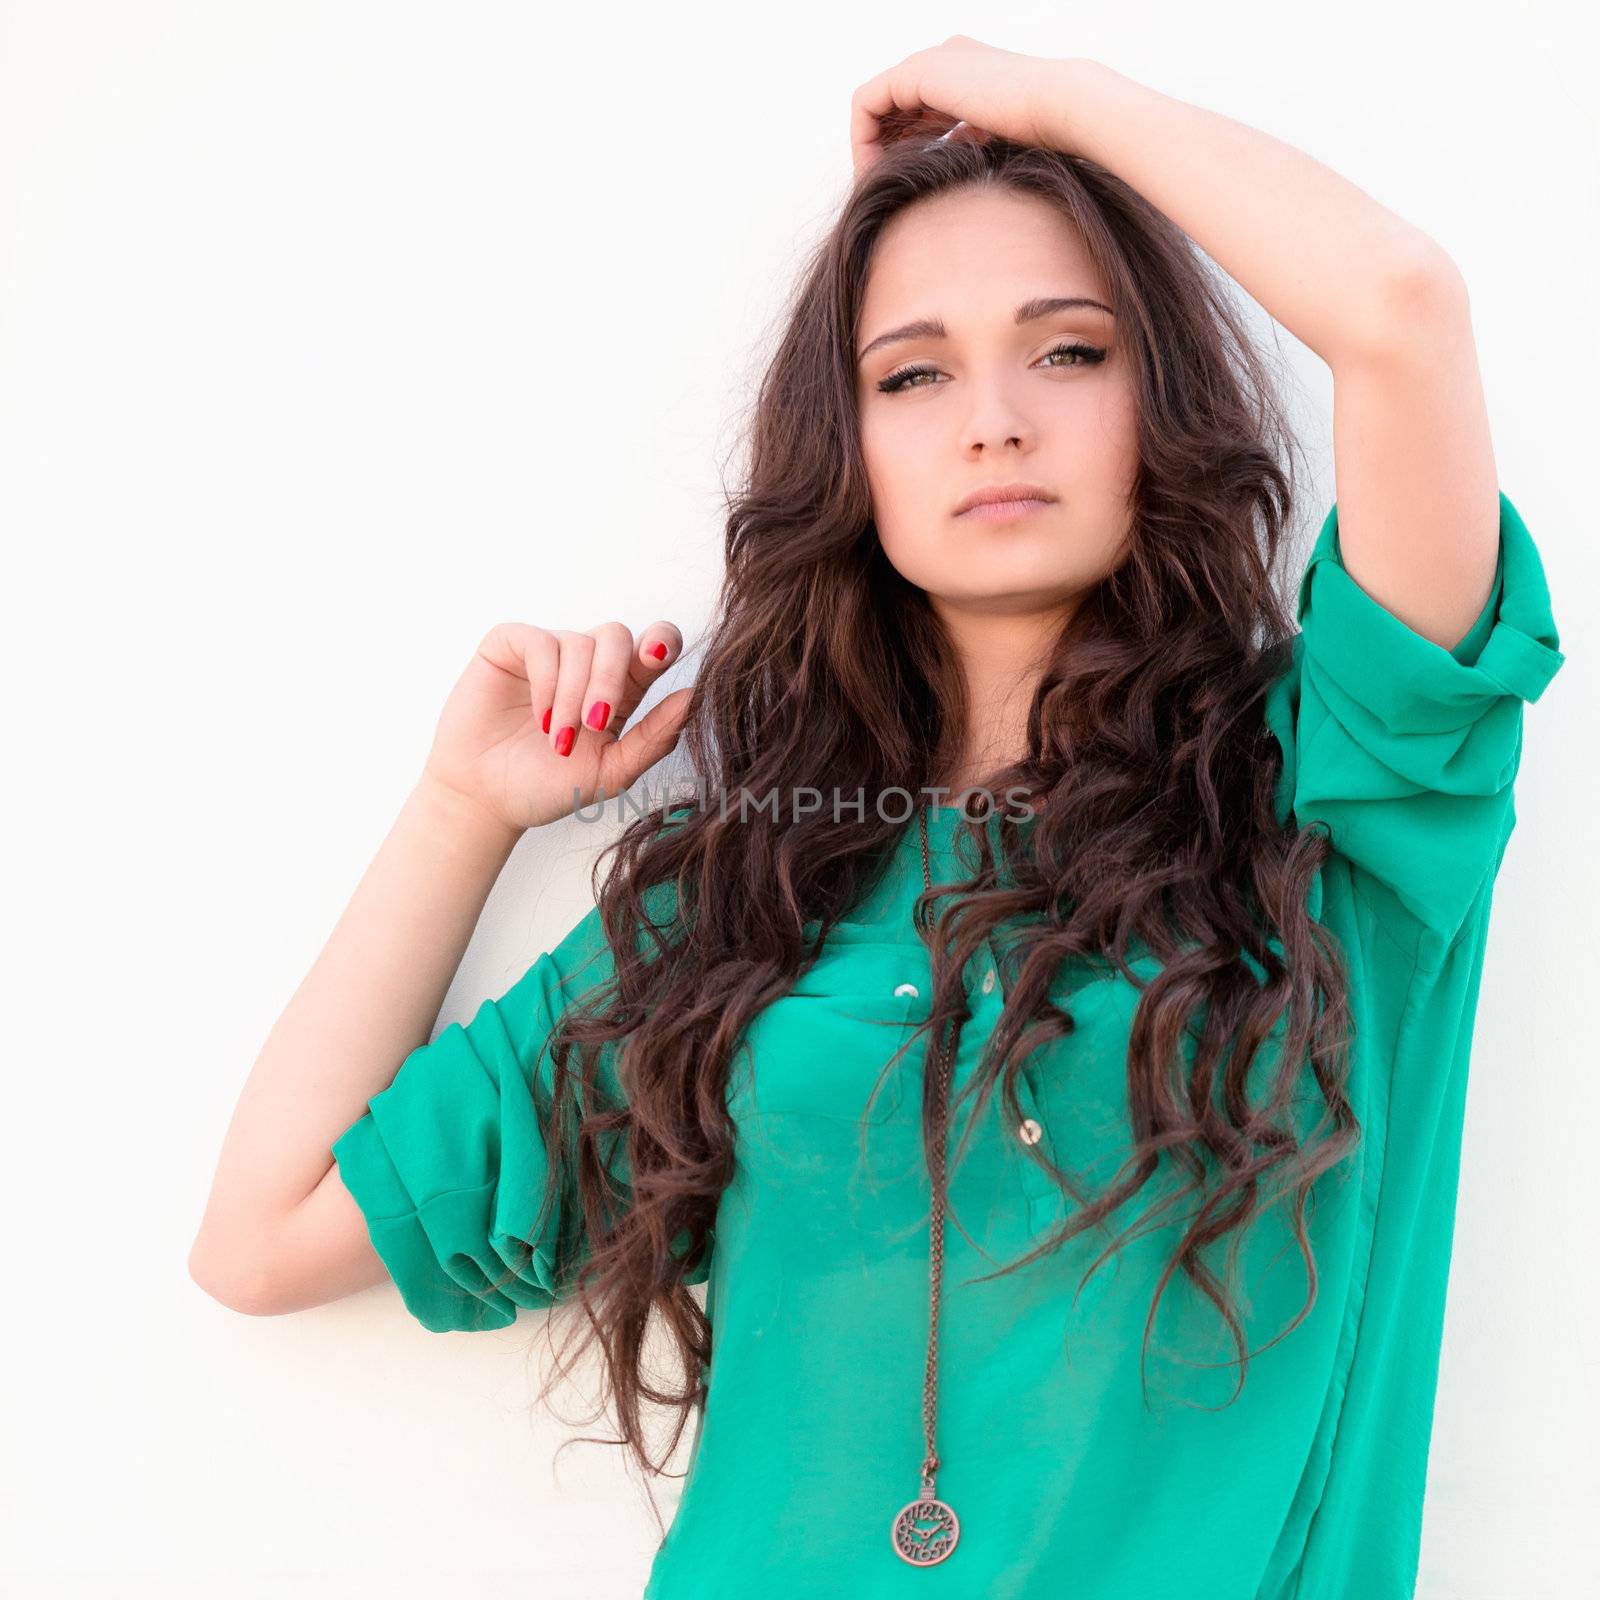 Young elegant woman on a white wall backround by Emevil